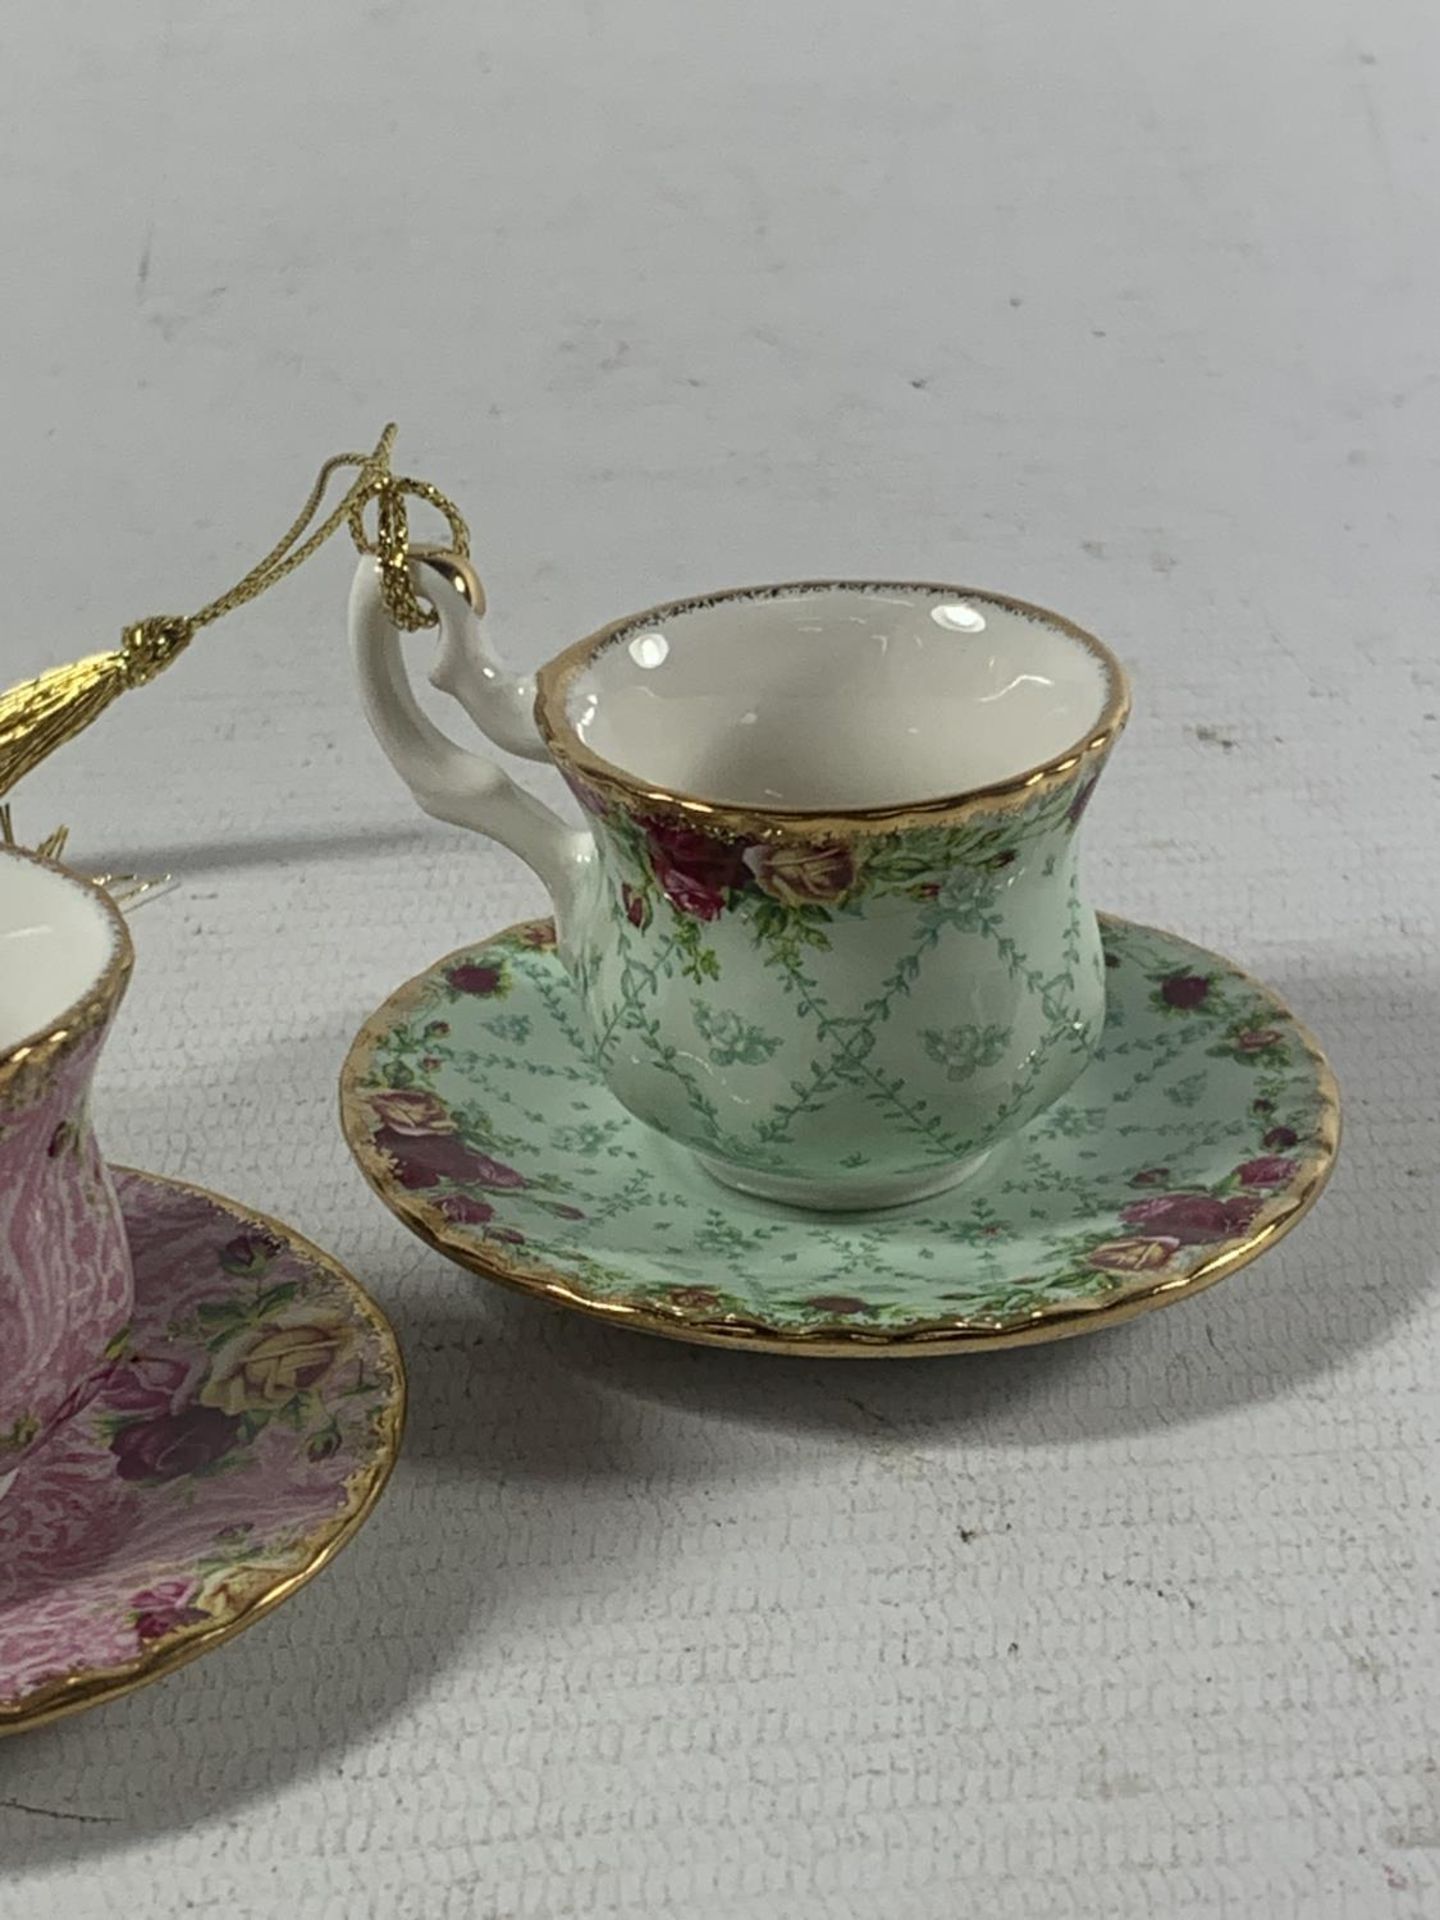 TWO ROYAL ALBERT BOXED MINATURE TEACUP AND SAUCER ORNAMENTS - DUSKY PINK AND PEPPERMINT - Image 4 of 5